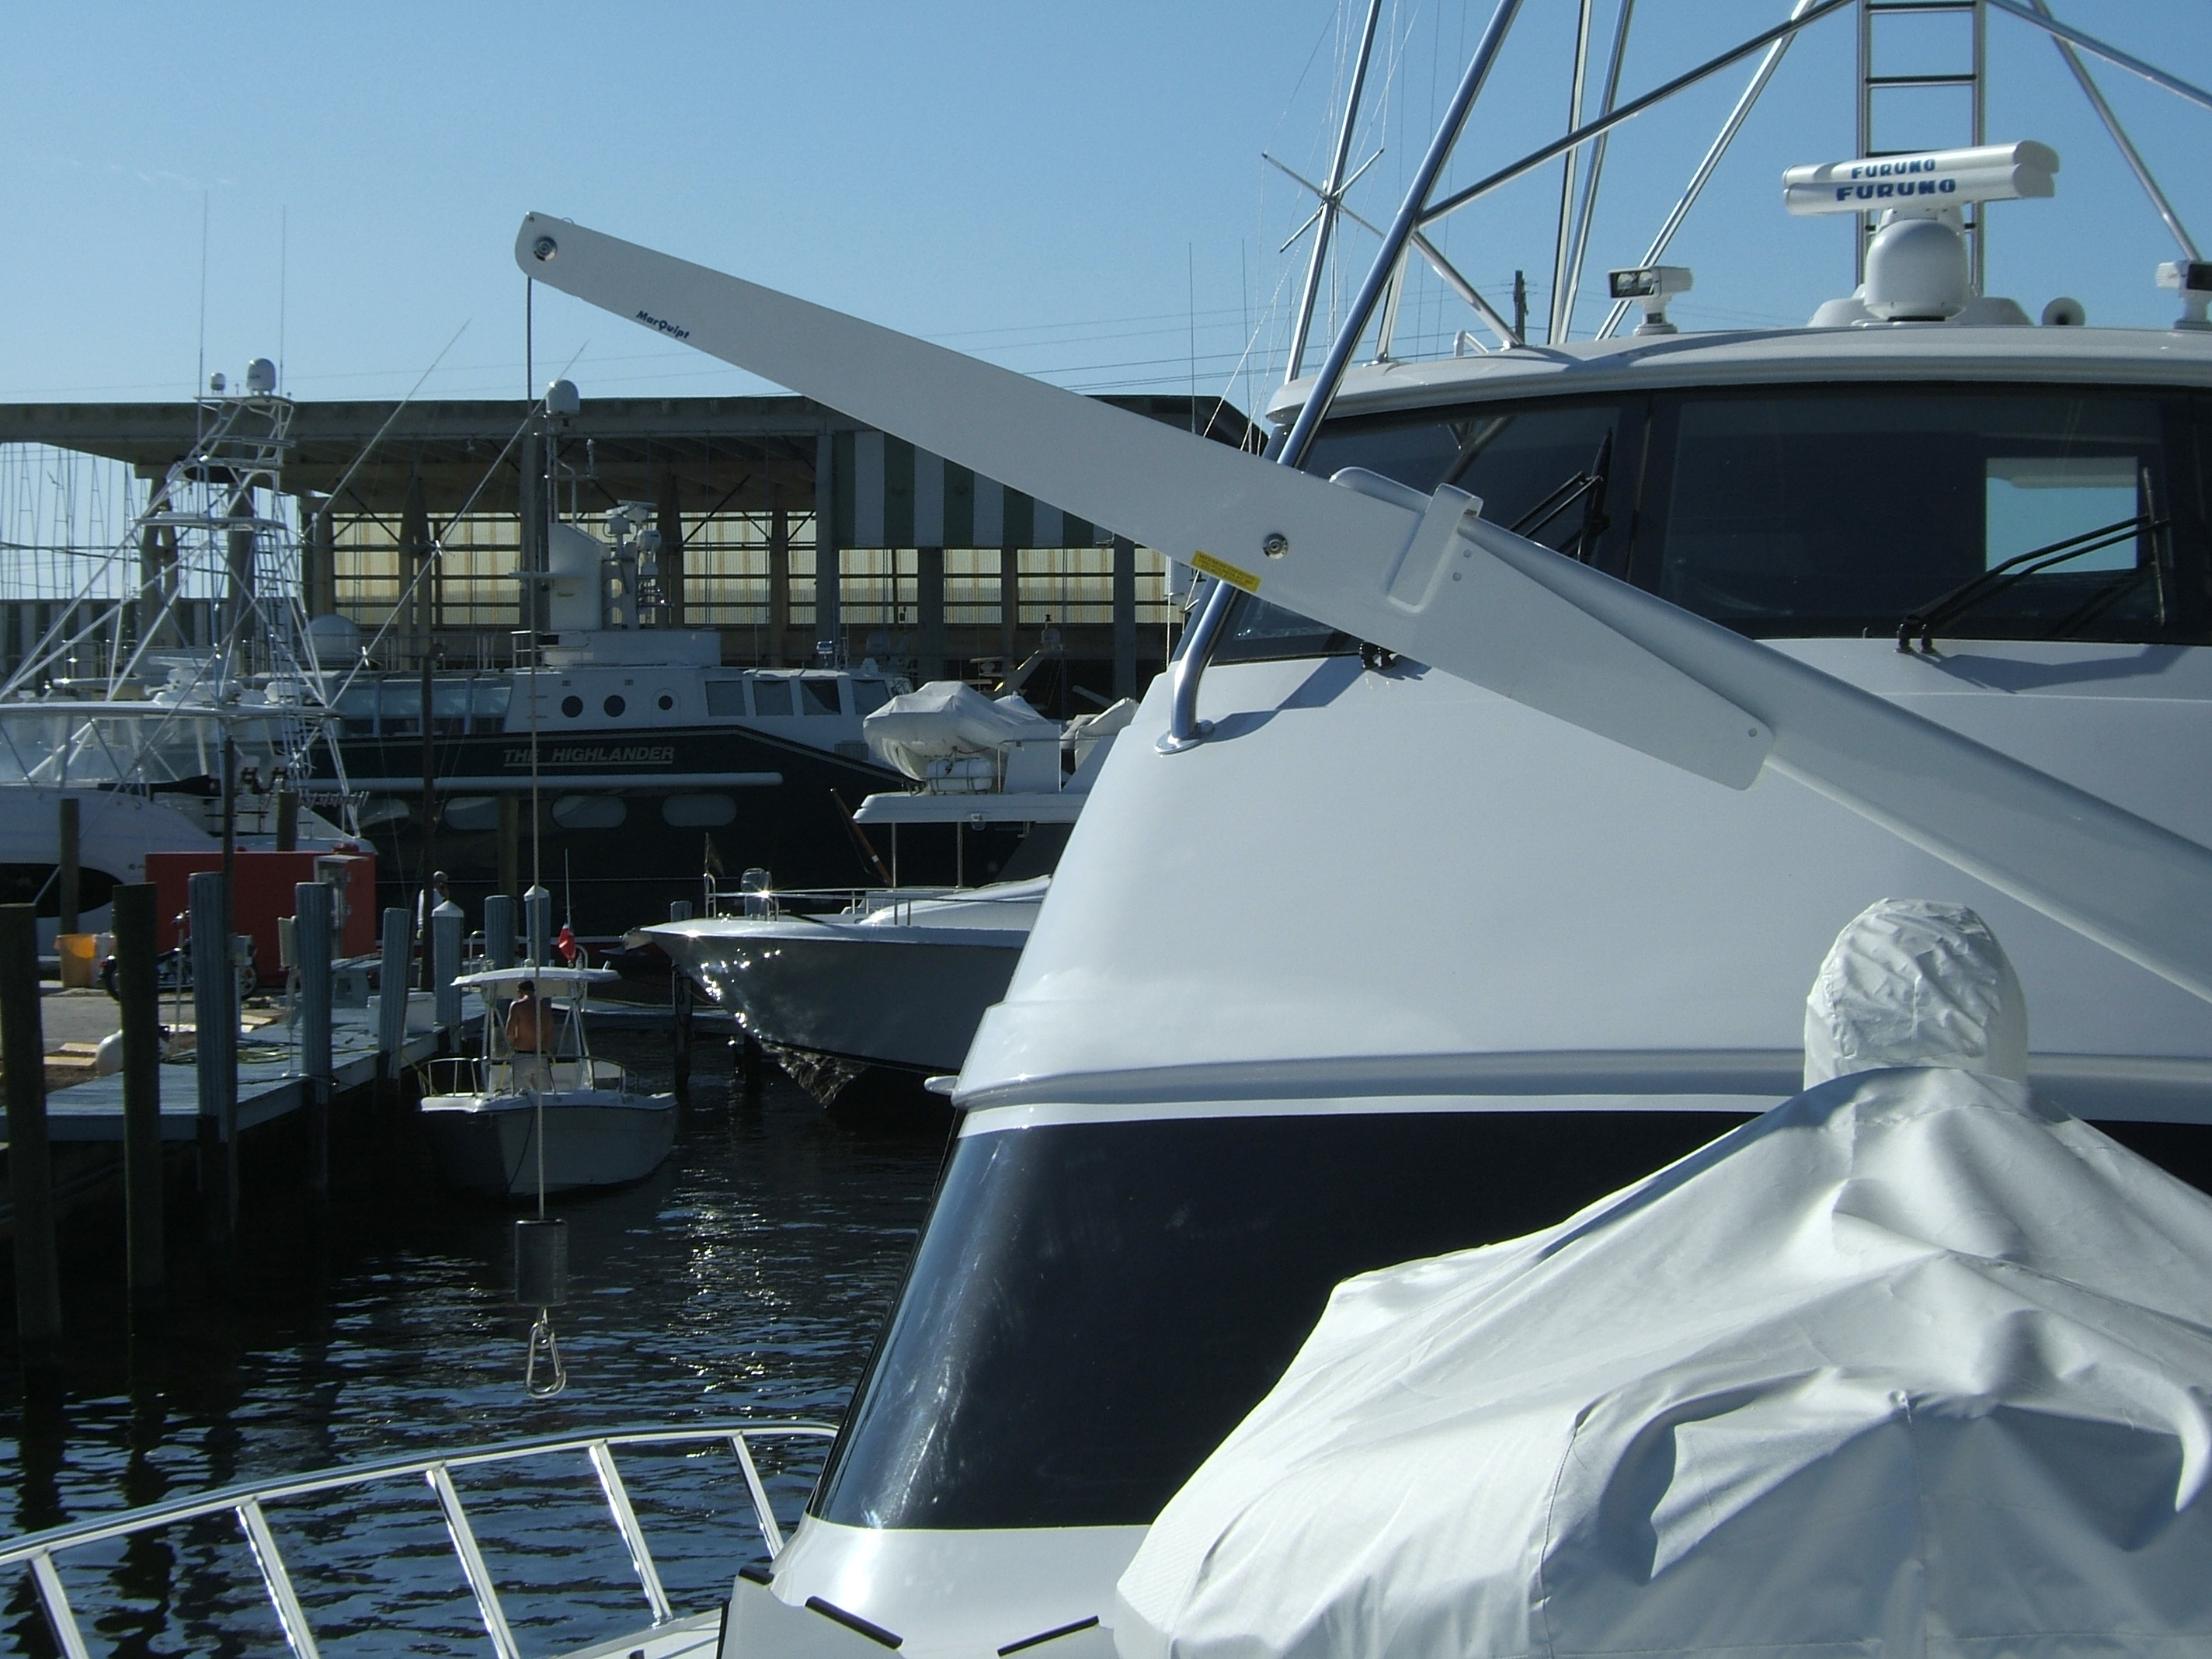 Slip-On Boom Extensions for davits